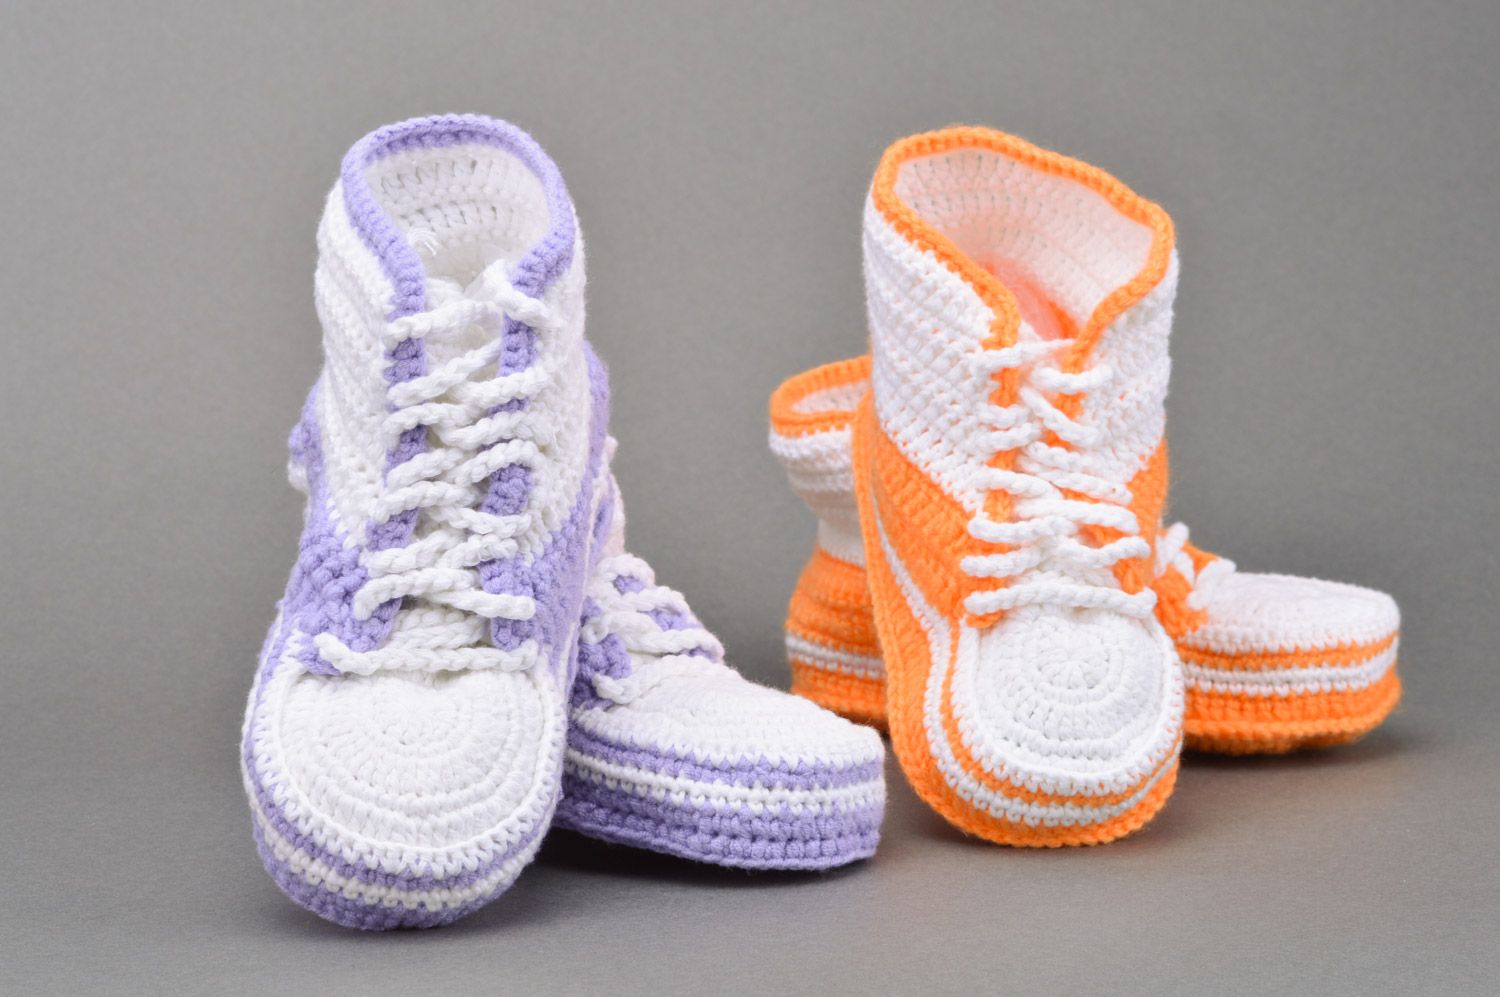 Handmade crocheted baby booties set of 2 pairs in orange and purple colors photo 5